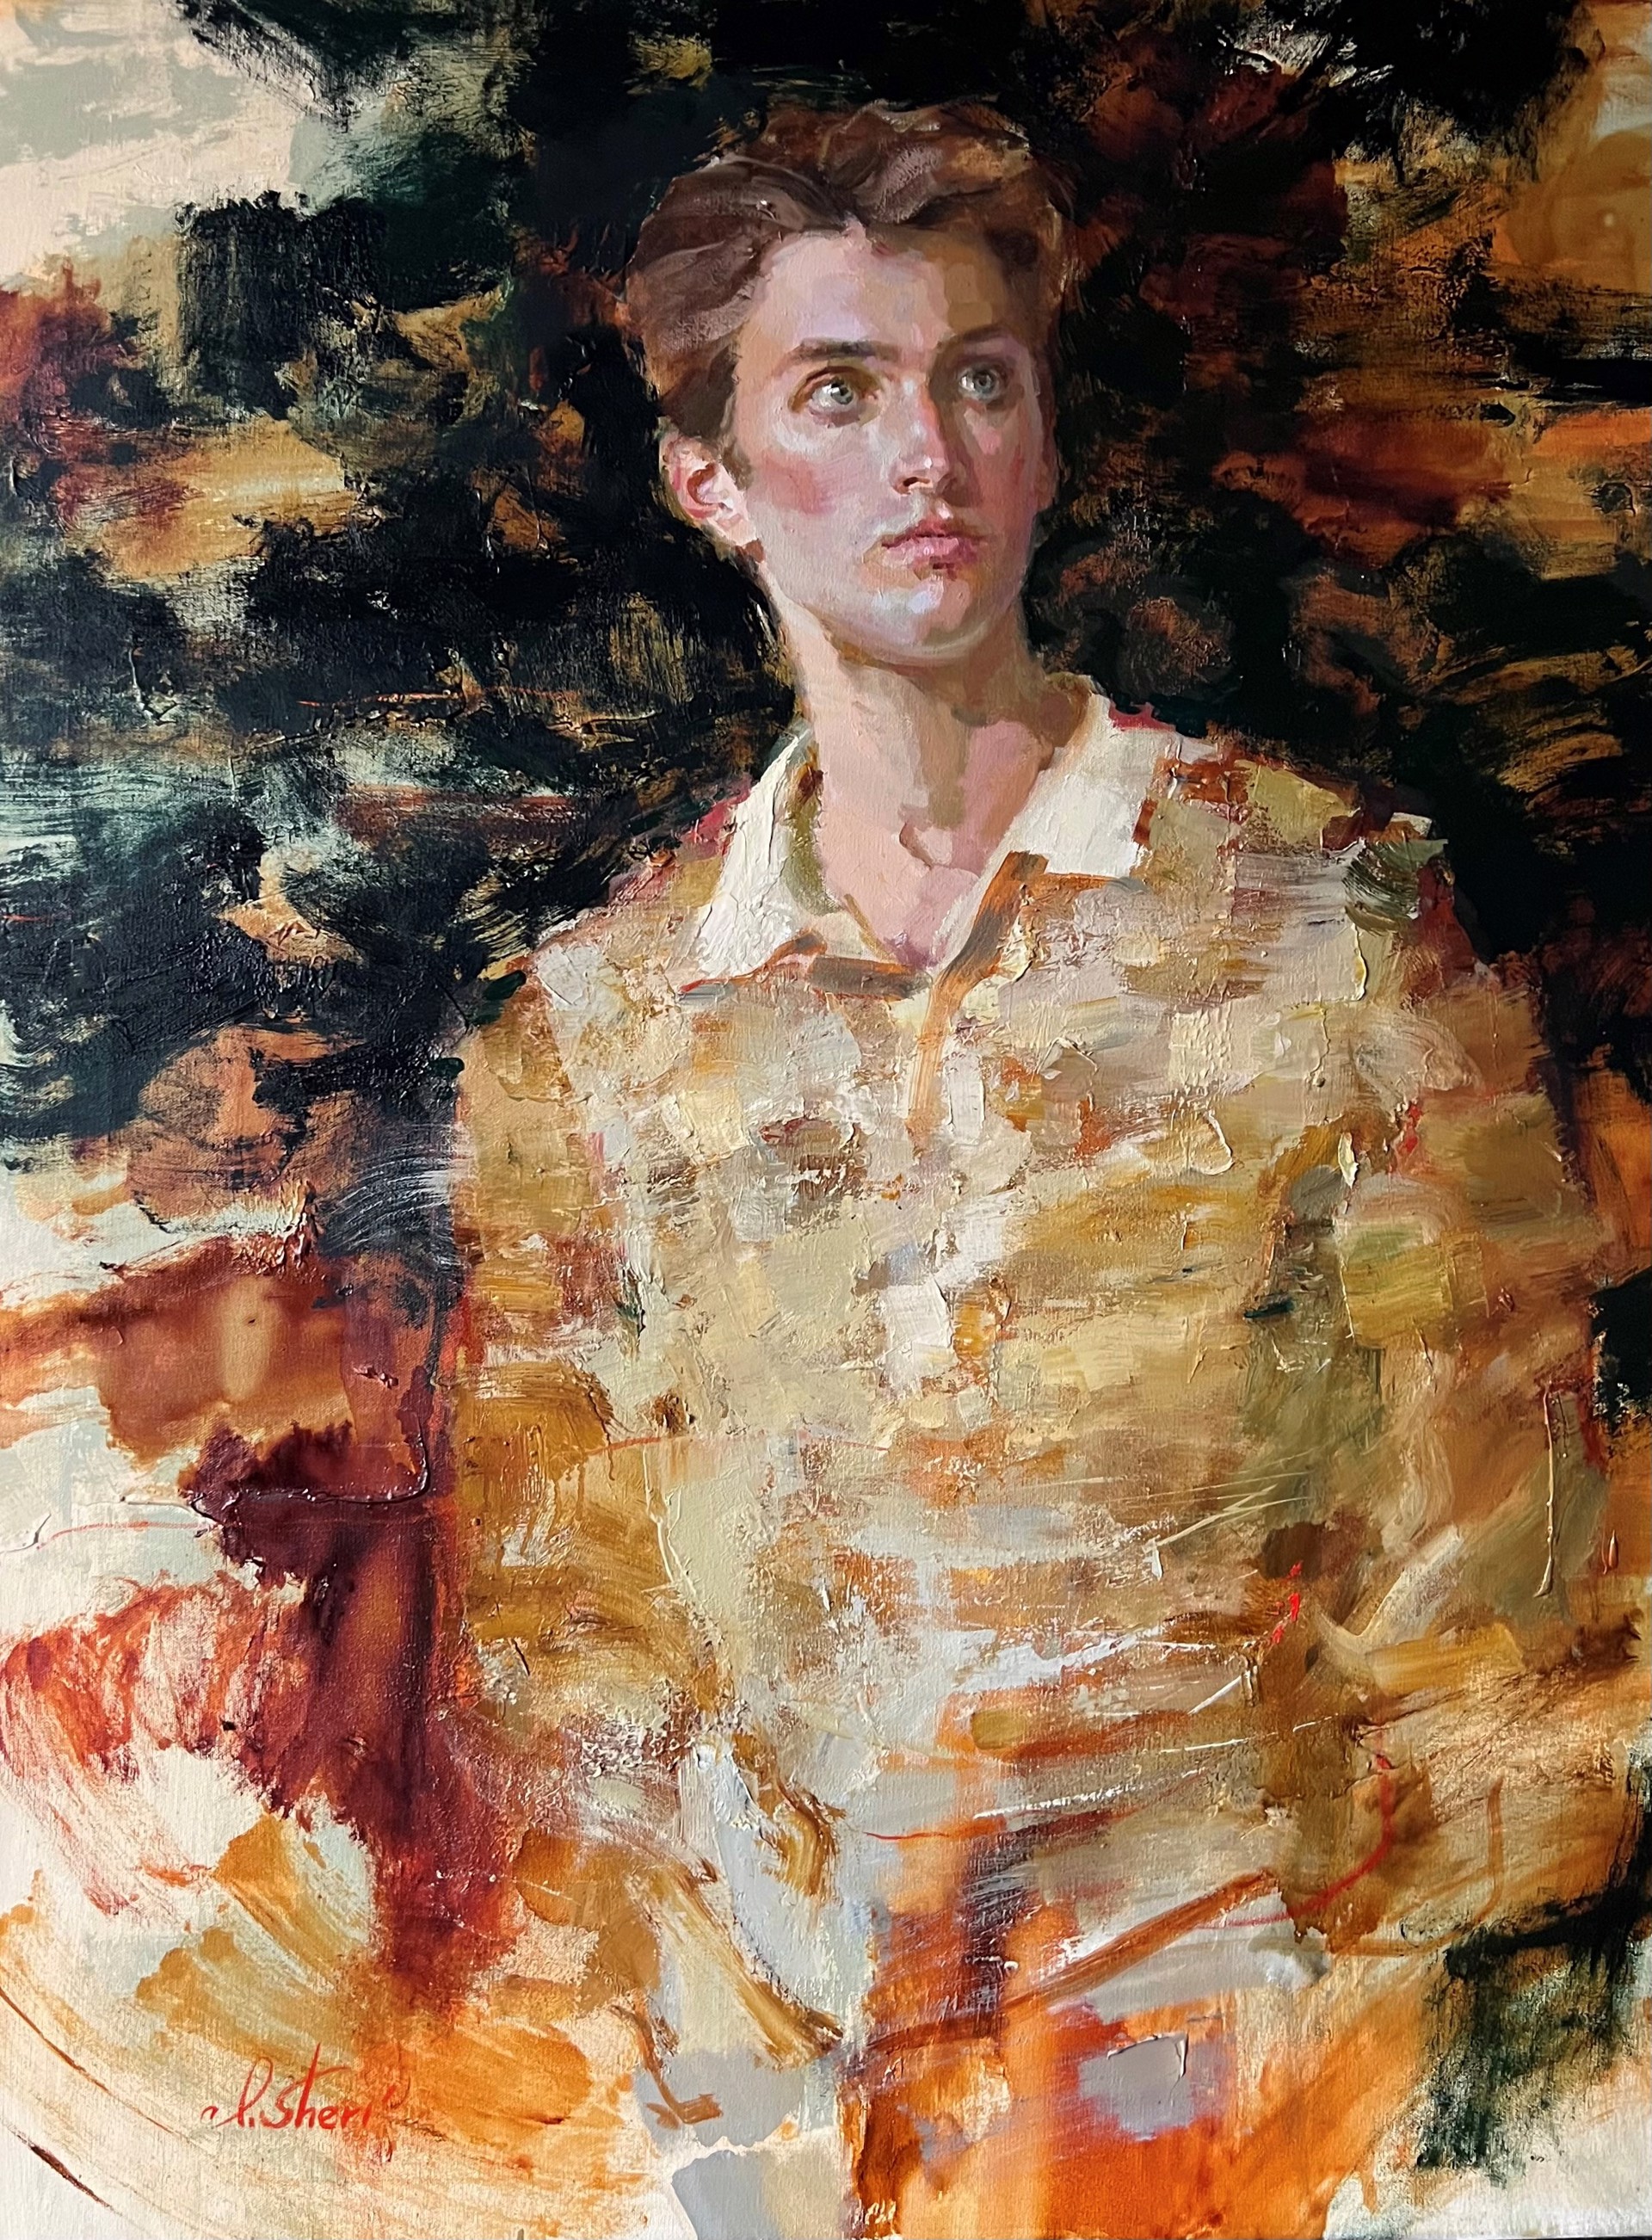 Portrait of a Young Man by Irene Sheri